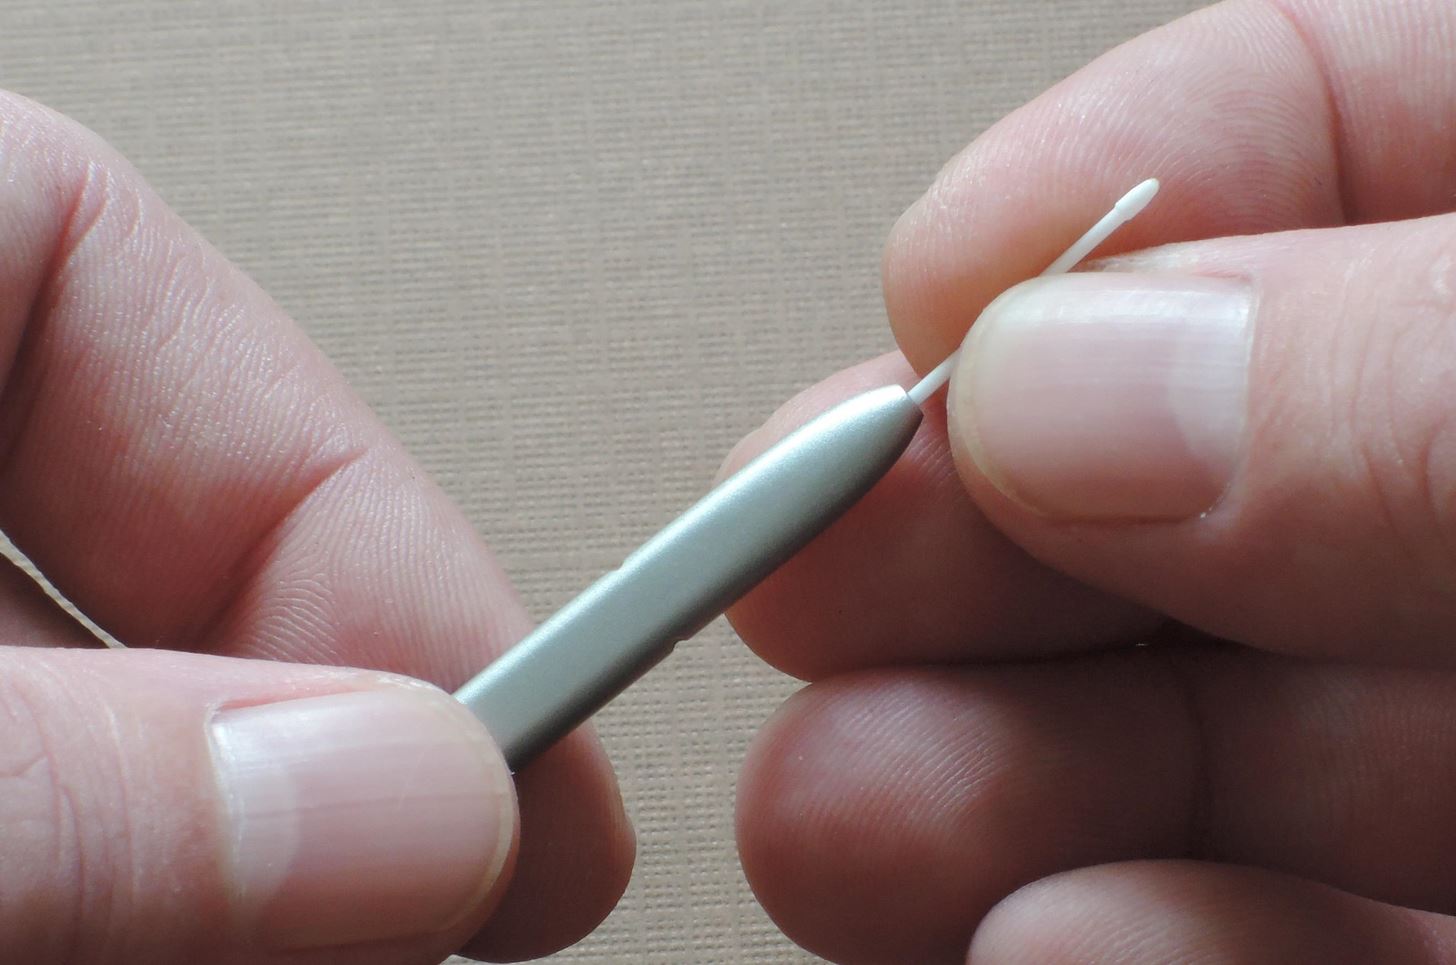 How to Replace the Tip of Your S Pen (& Why You Should)